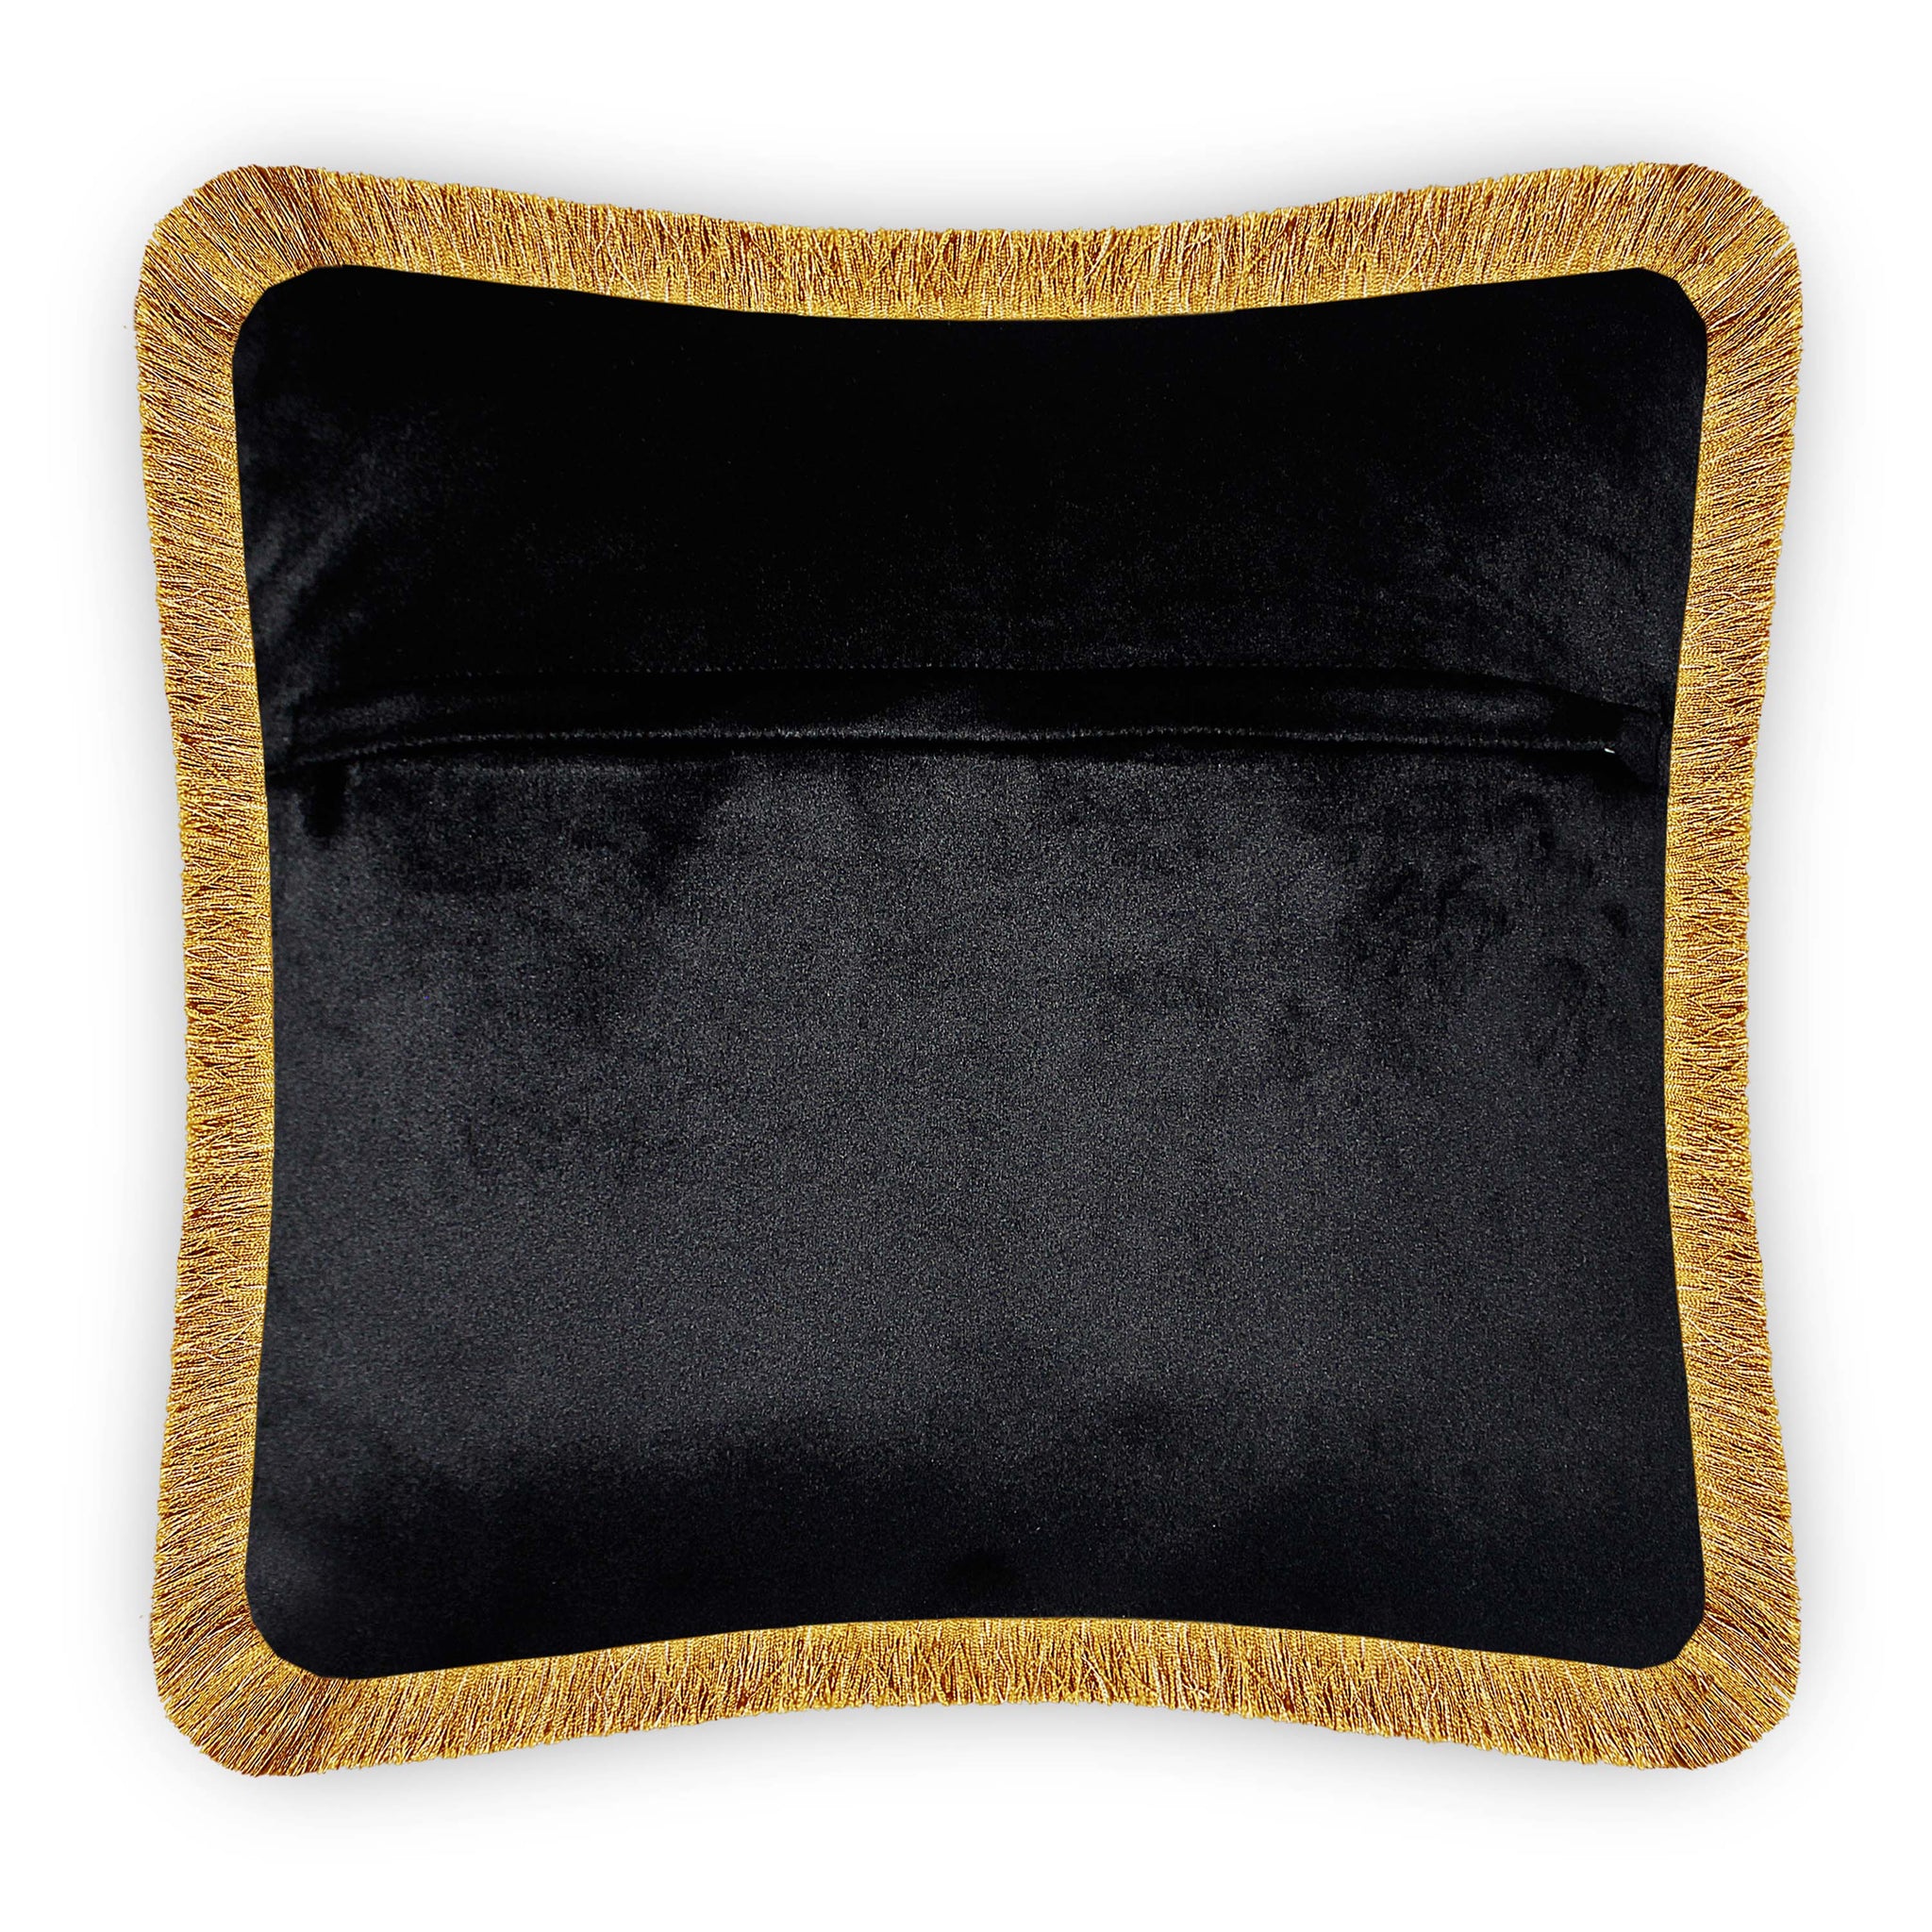 Black Velvet Cushion Cover Exotic Flower Decorative Pillowcase Modern Home Décor Throw Pillow for Sofa Chair Couch Bedroom 45x45 cm 18x18 In